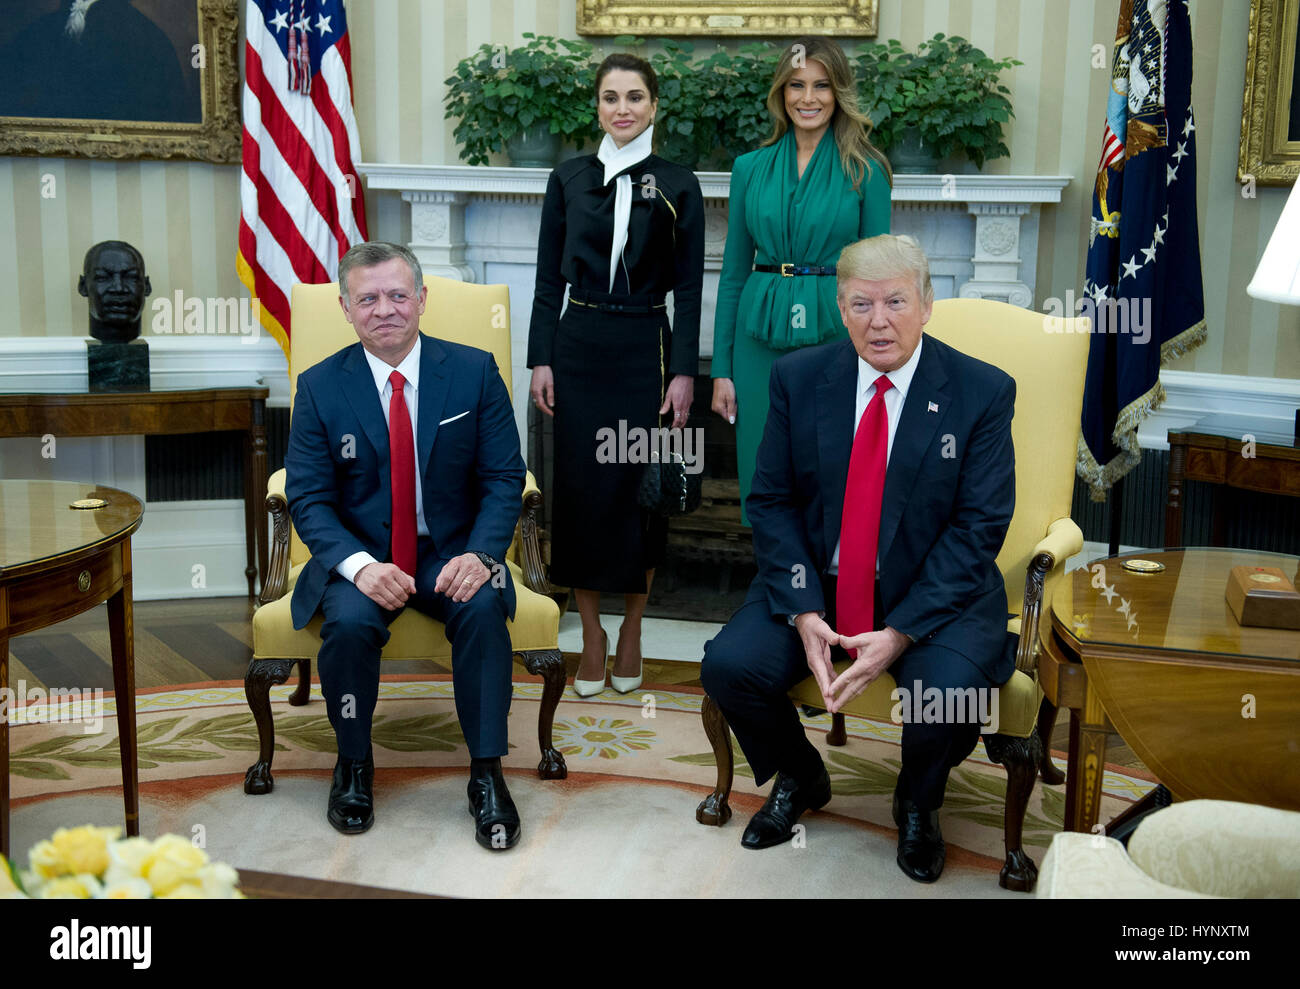 United States President Donald J. Trump meets King Abdullah II of Jordan in the Oval Office of the White House in Washington, DC on Wednesday, April 5, 2017. Standing behind the King and President are Queen Rania of Jordan, left, and first lady Melania Trump. Credit: Ron Sachs/Pool via CNP - NO WIRE SERVICE - Photo: Ron Sachs/Consolidated News Photos/Ron Sachs - Pool via CNP Stock Photo